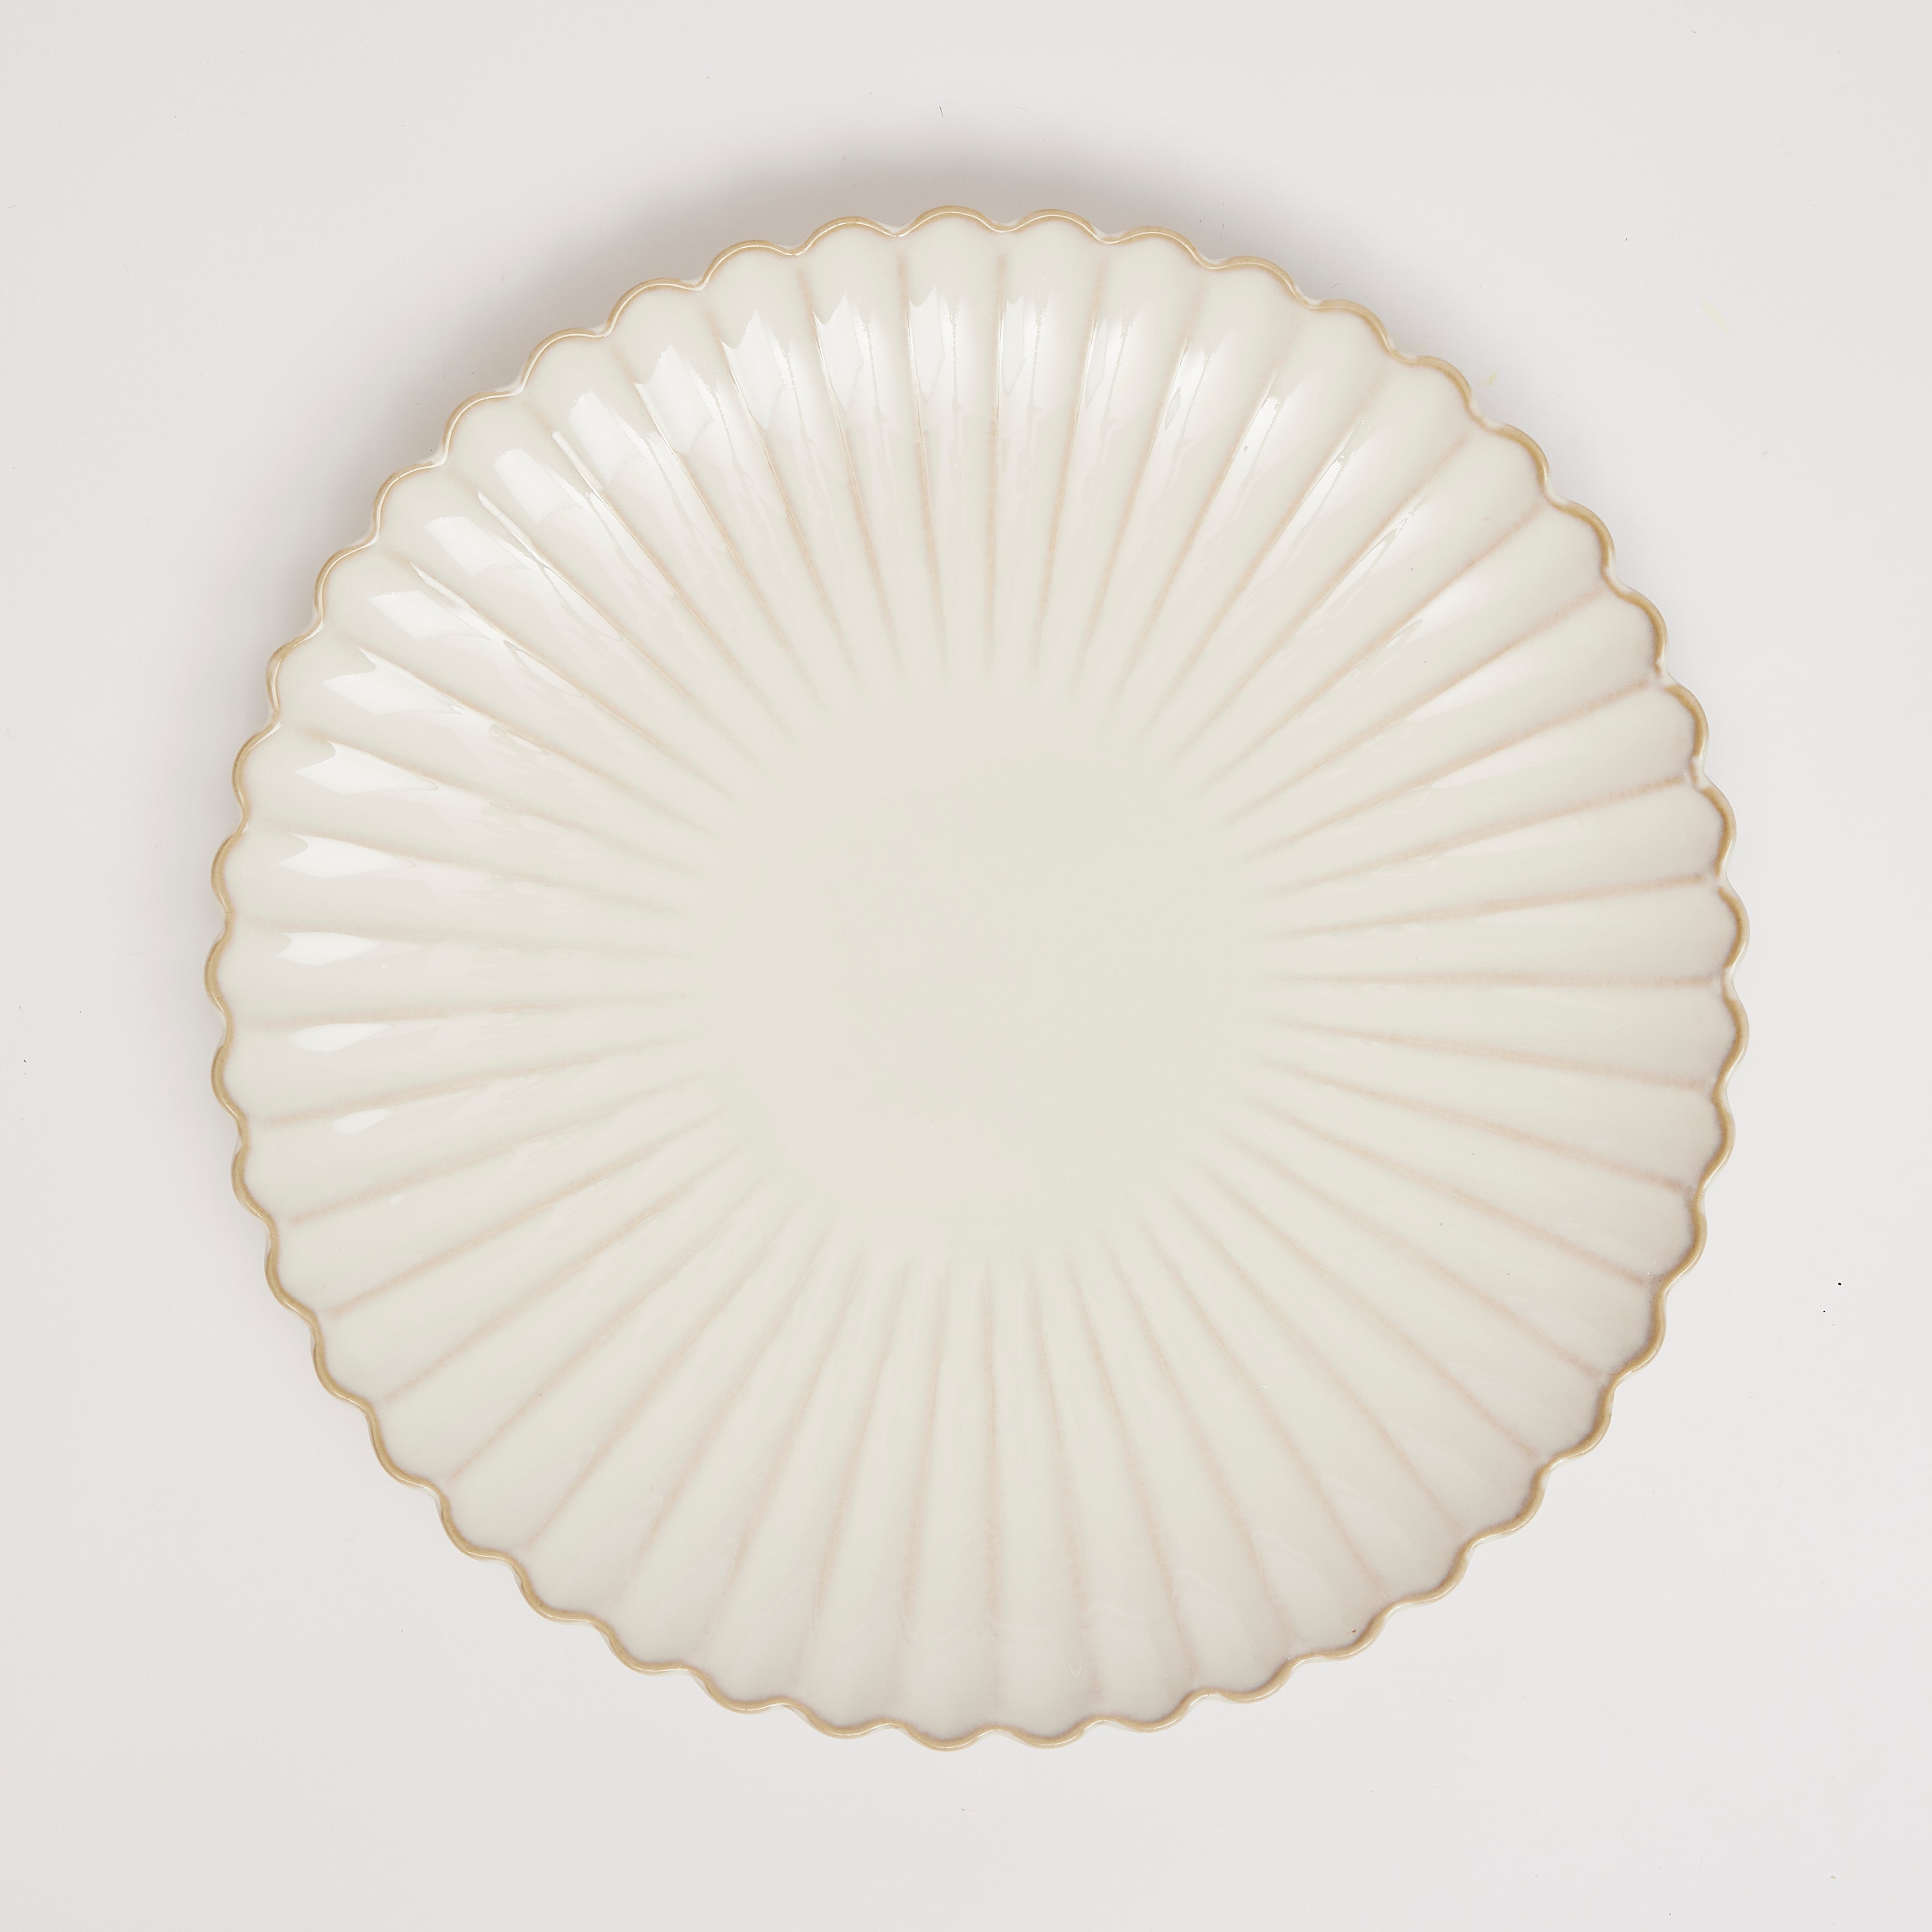 Scallop Dinner Plates (set of 4)